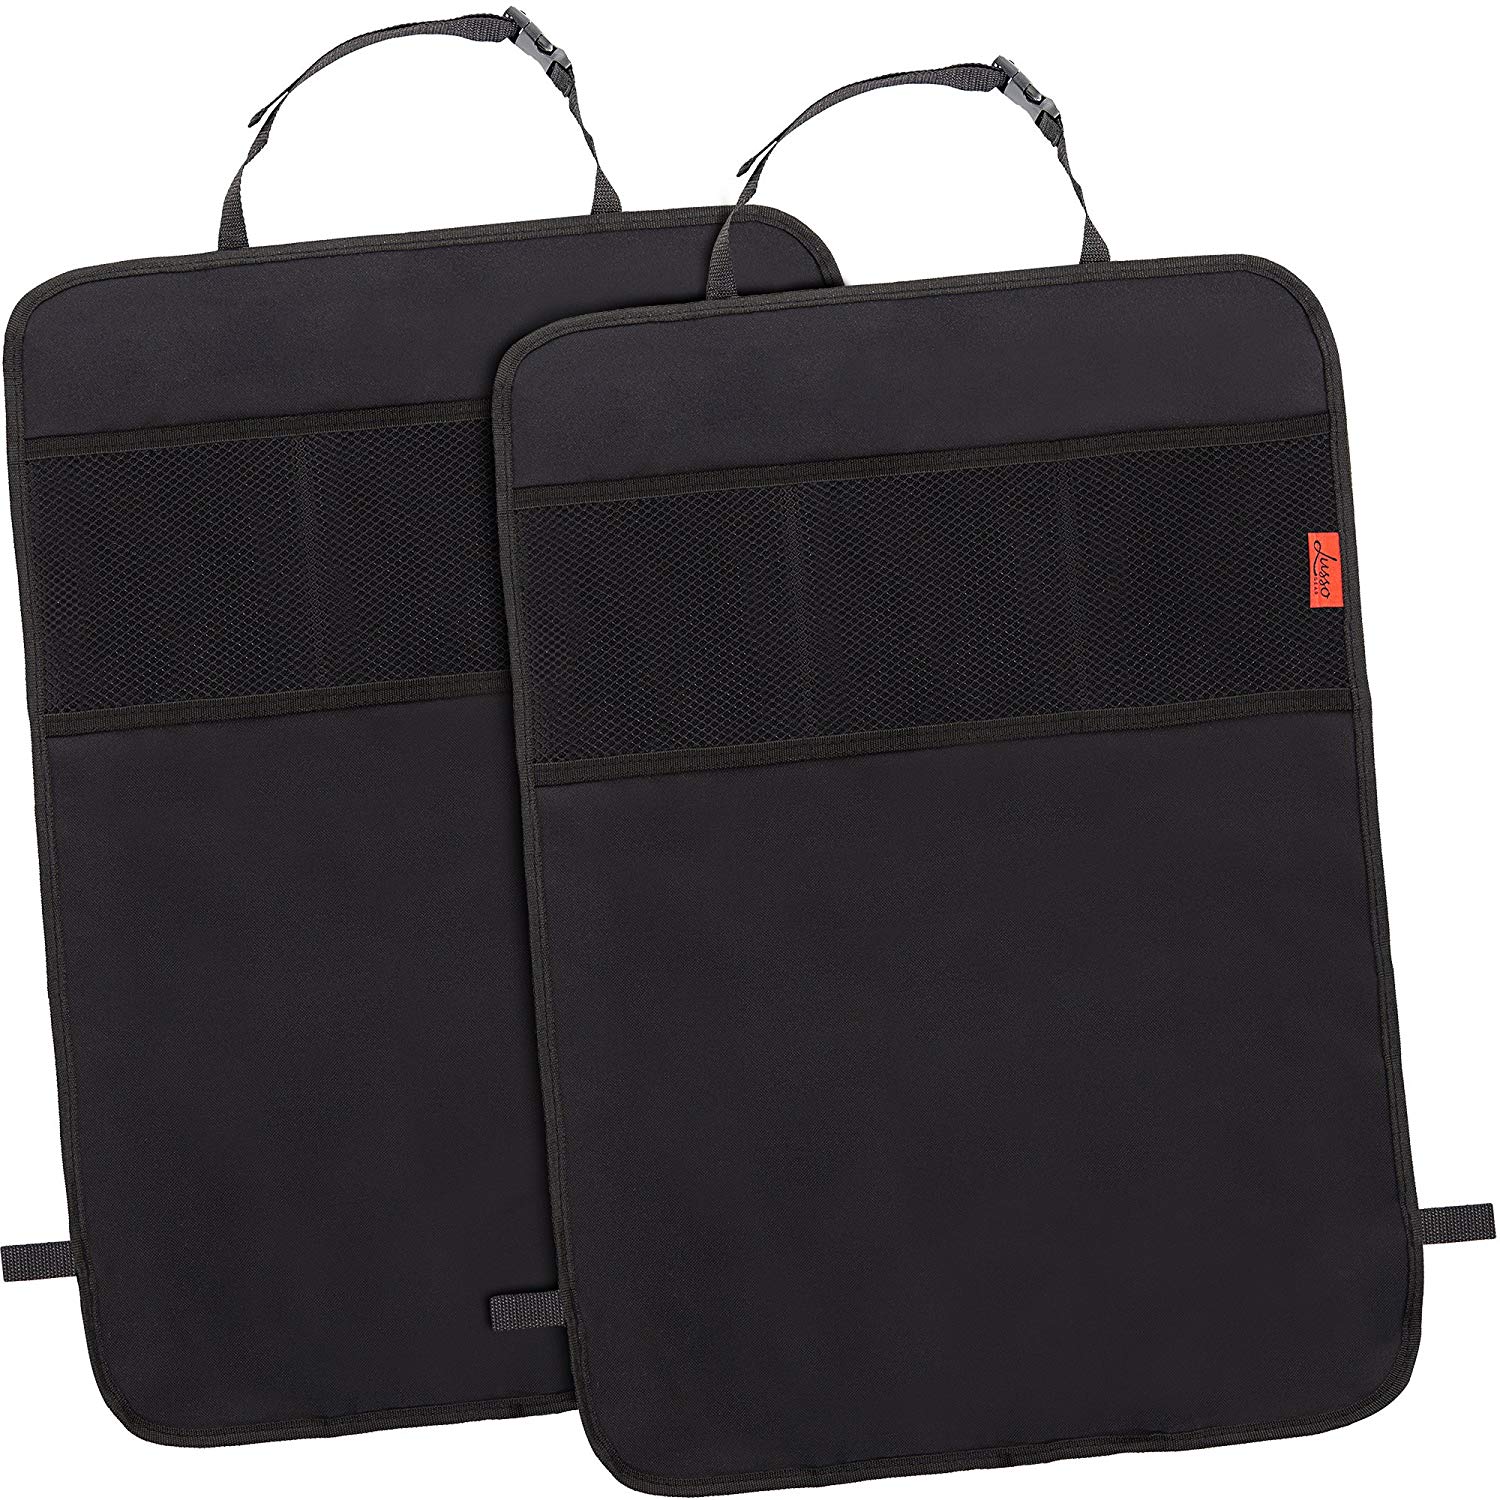 Lusso Gear | Seat Back Protectors for Car | Waterproof Kick Mats with 3 Storage Pockets | 2 Pack, Black - image 1 of 6